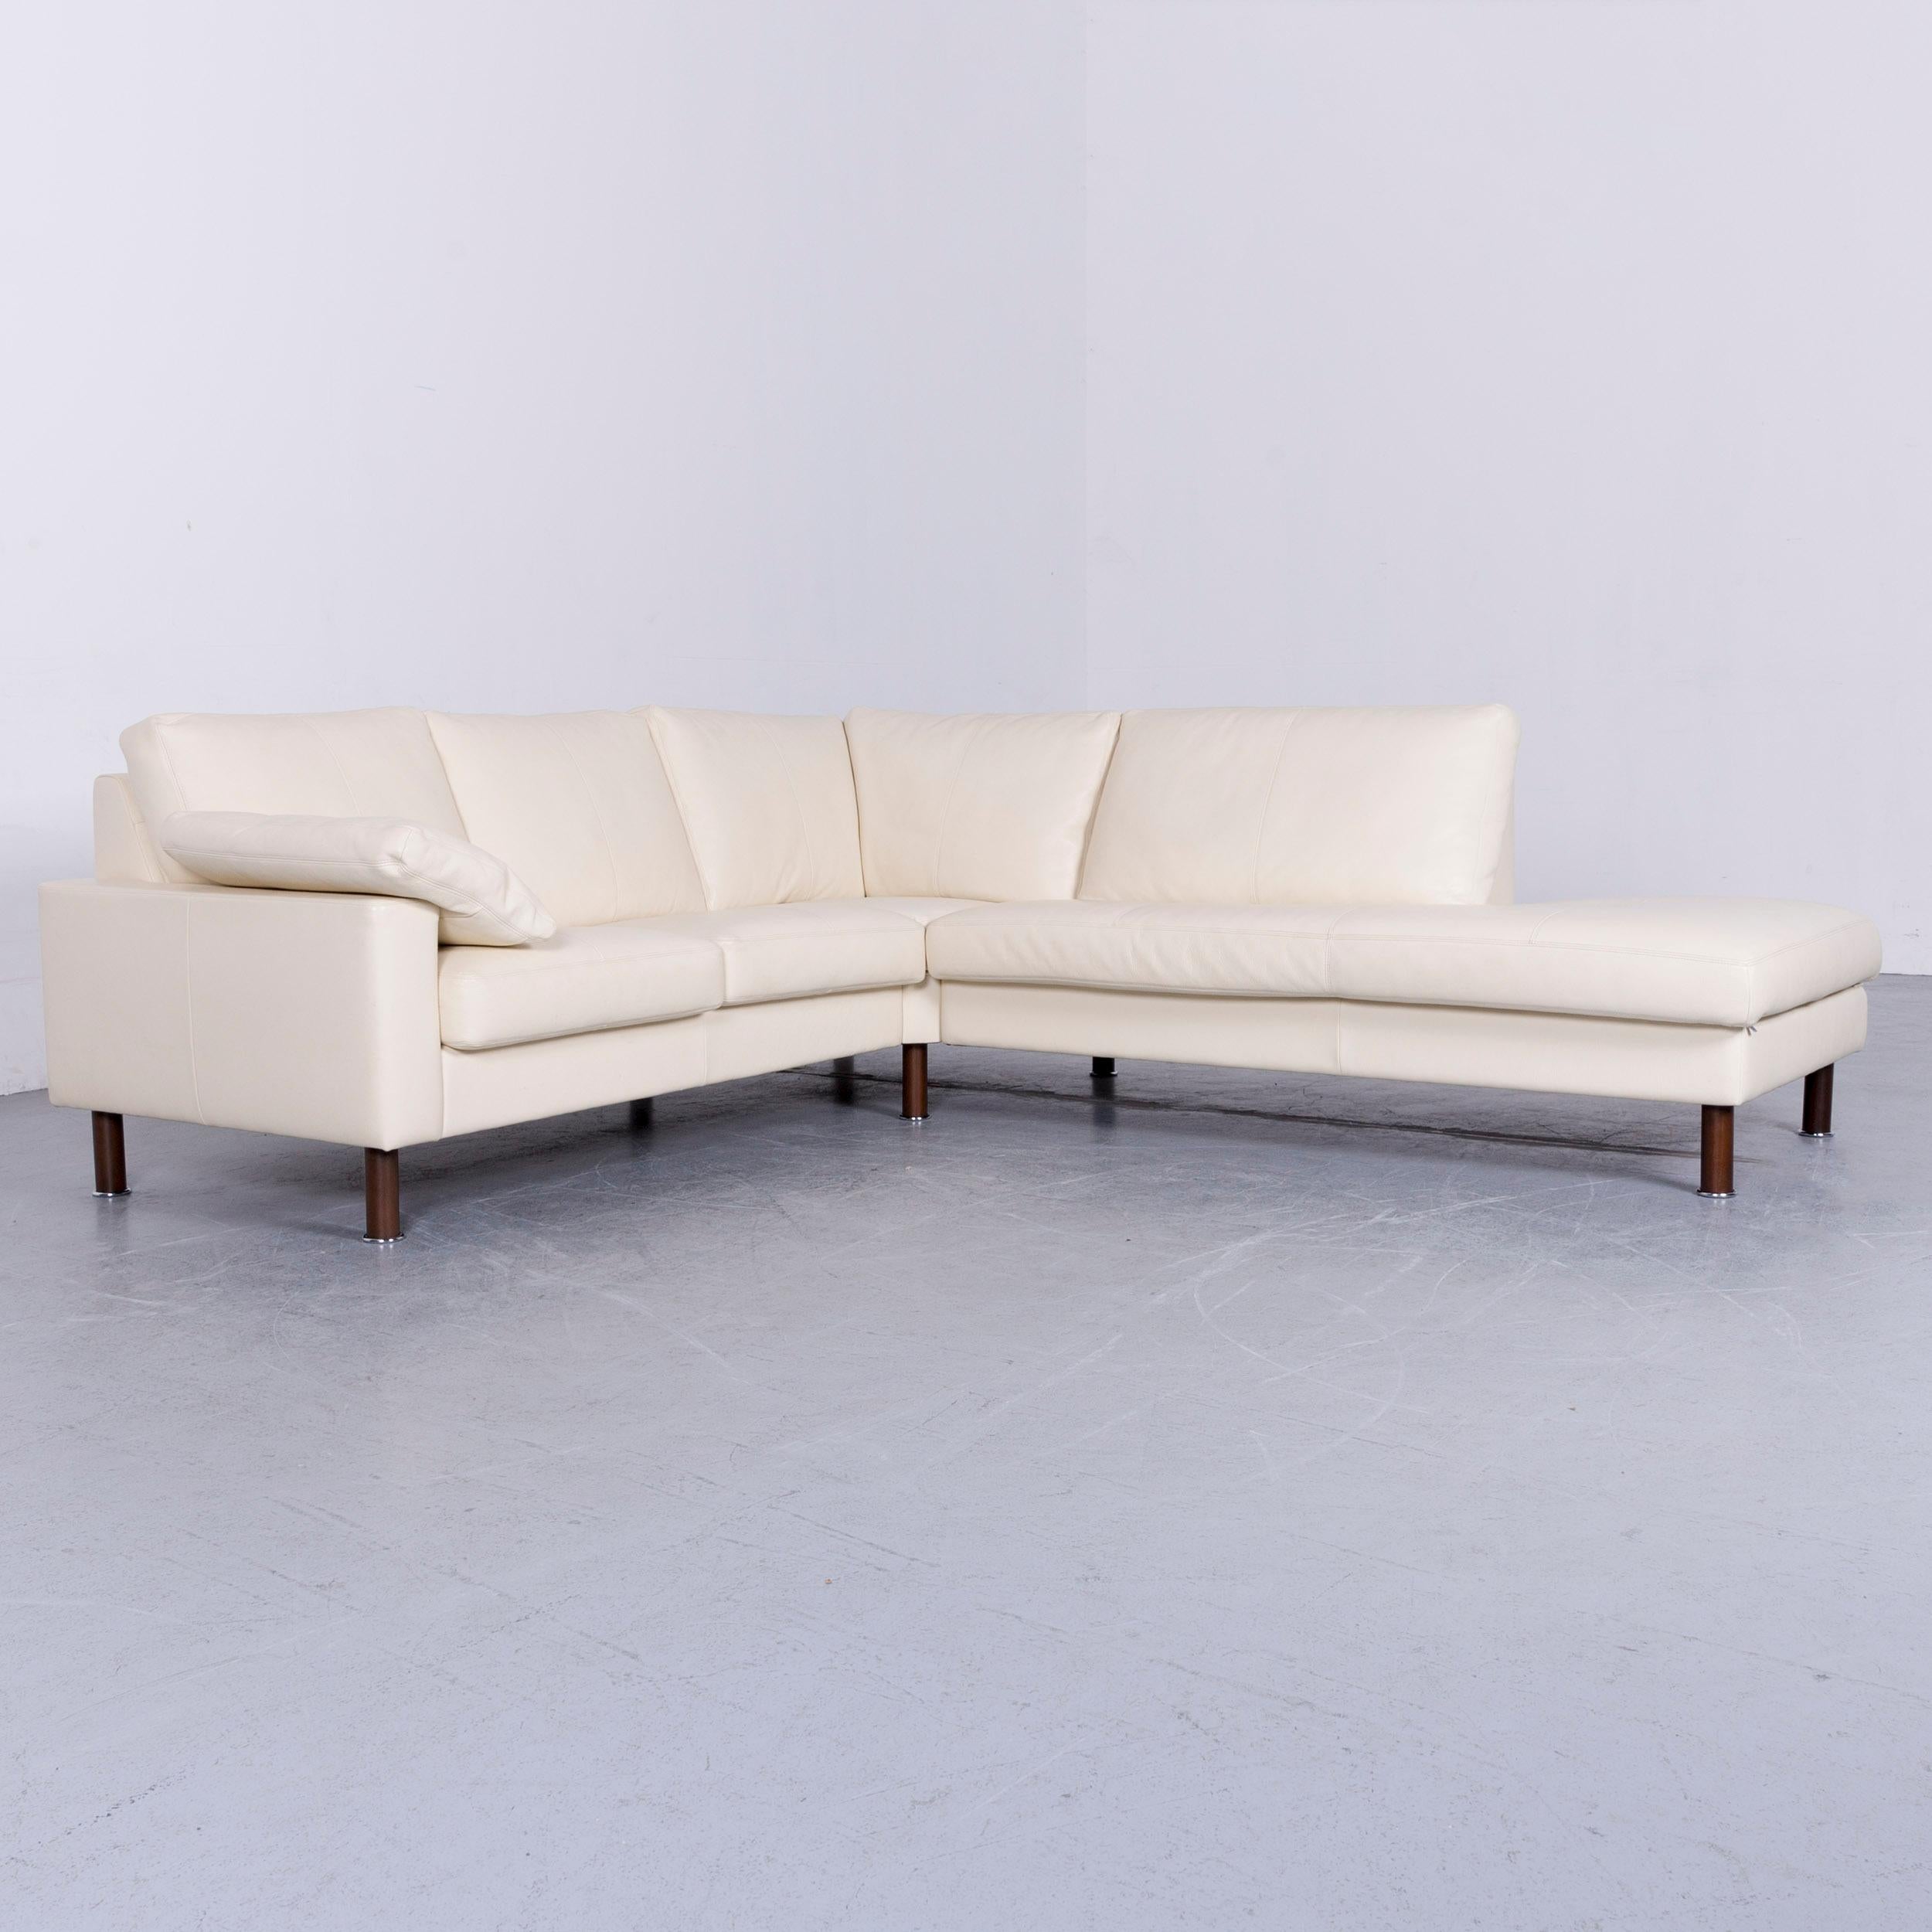 We bring to you an Erpo designer sofa leather crème corner-sofa couch.